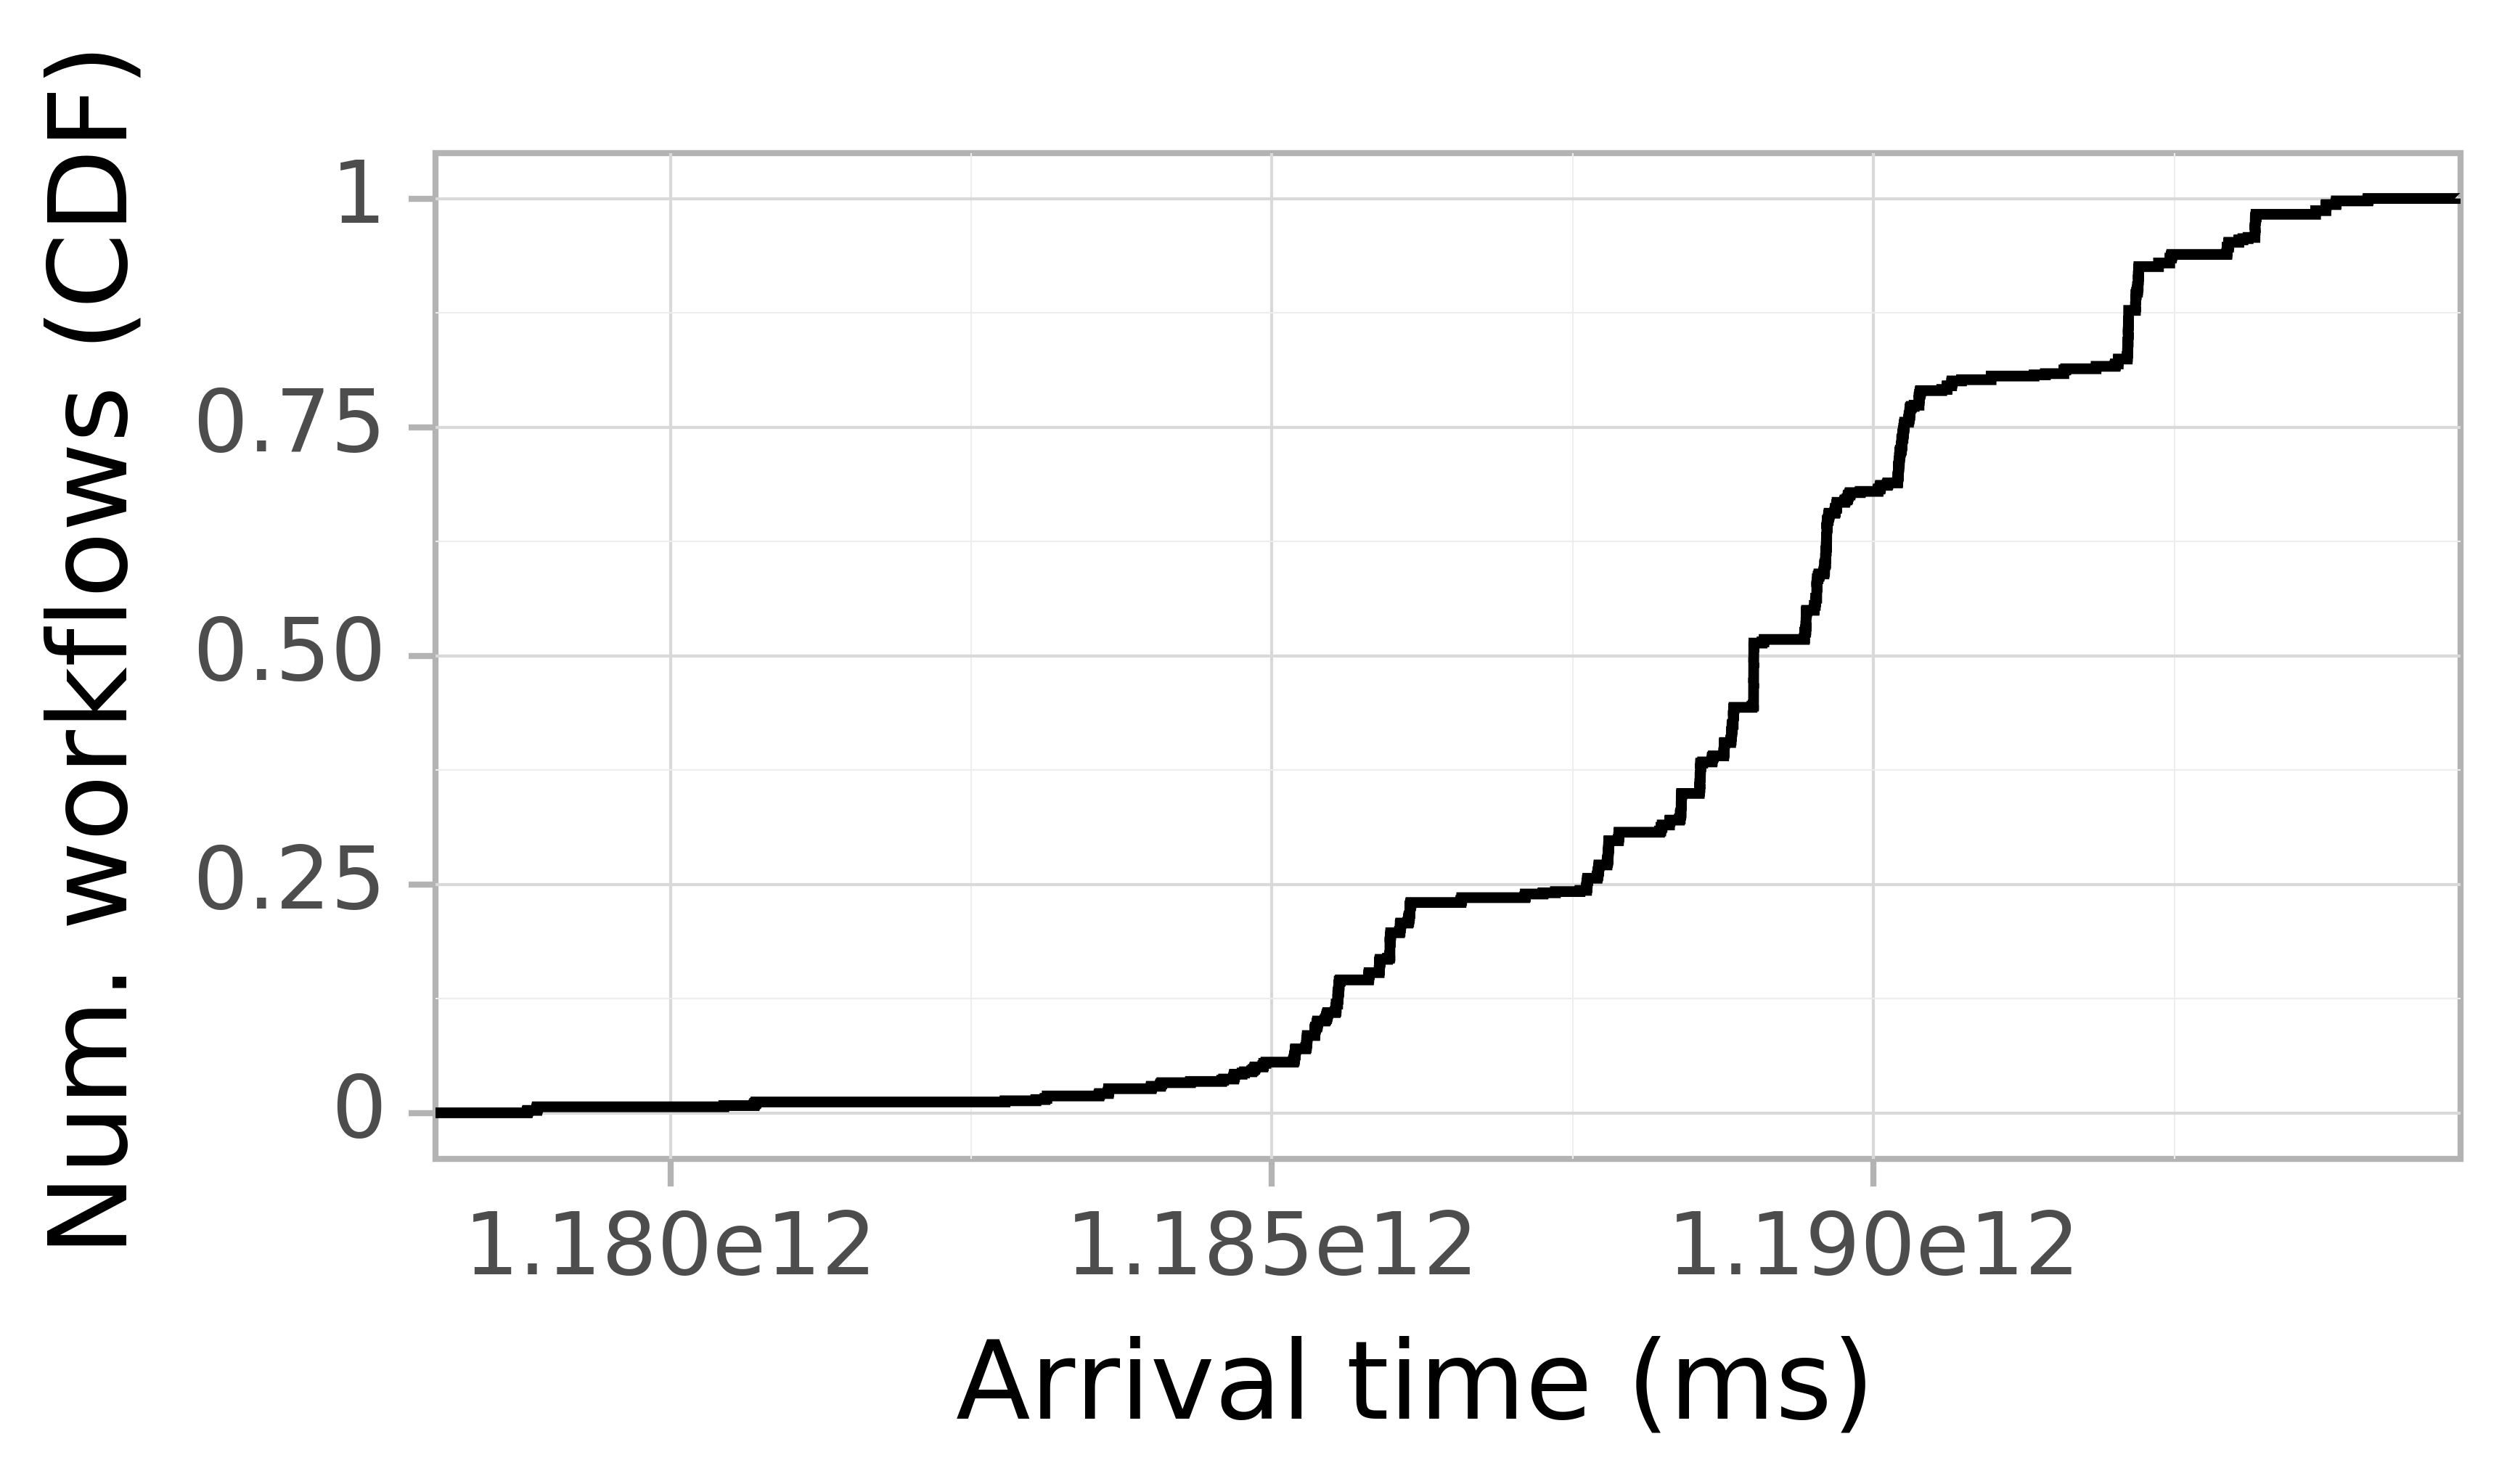 Job arrival CDF graph for the askalon_ee2 trace.